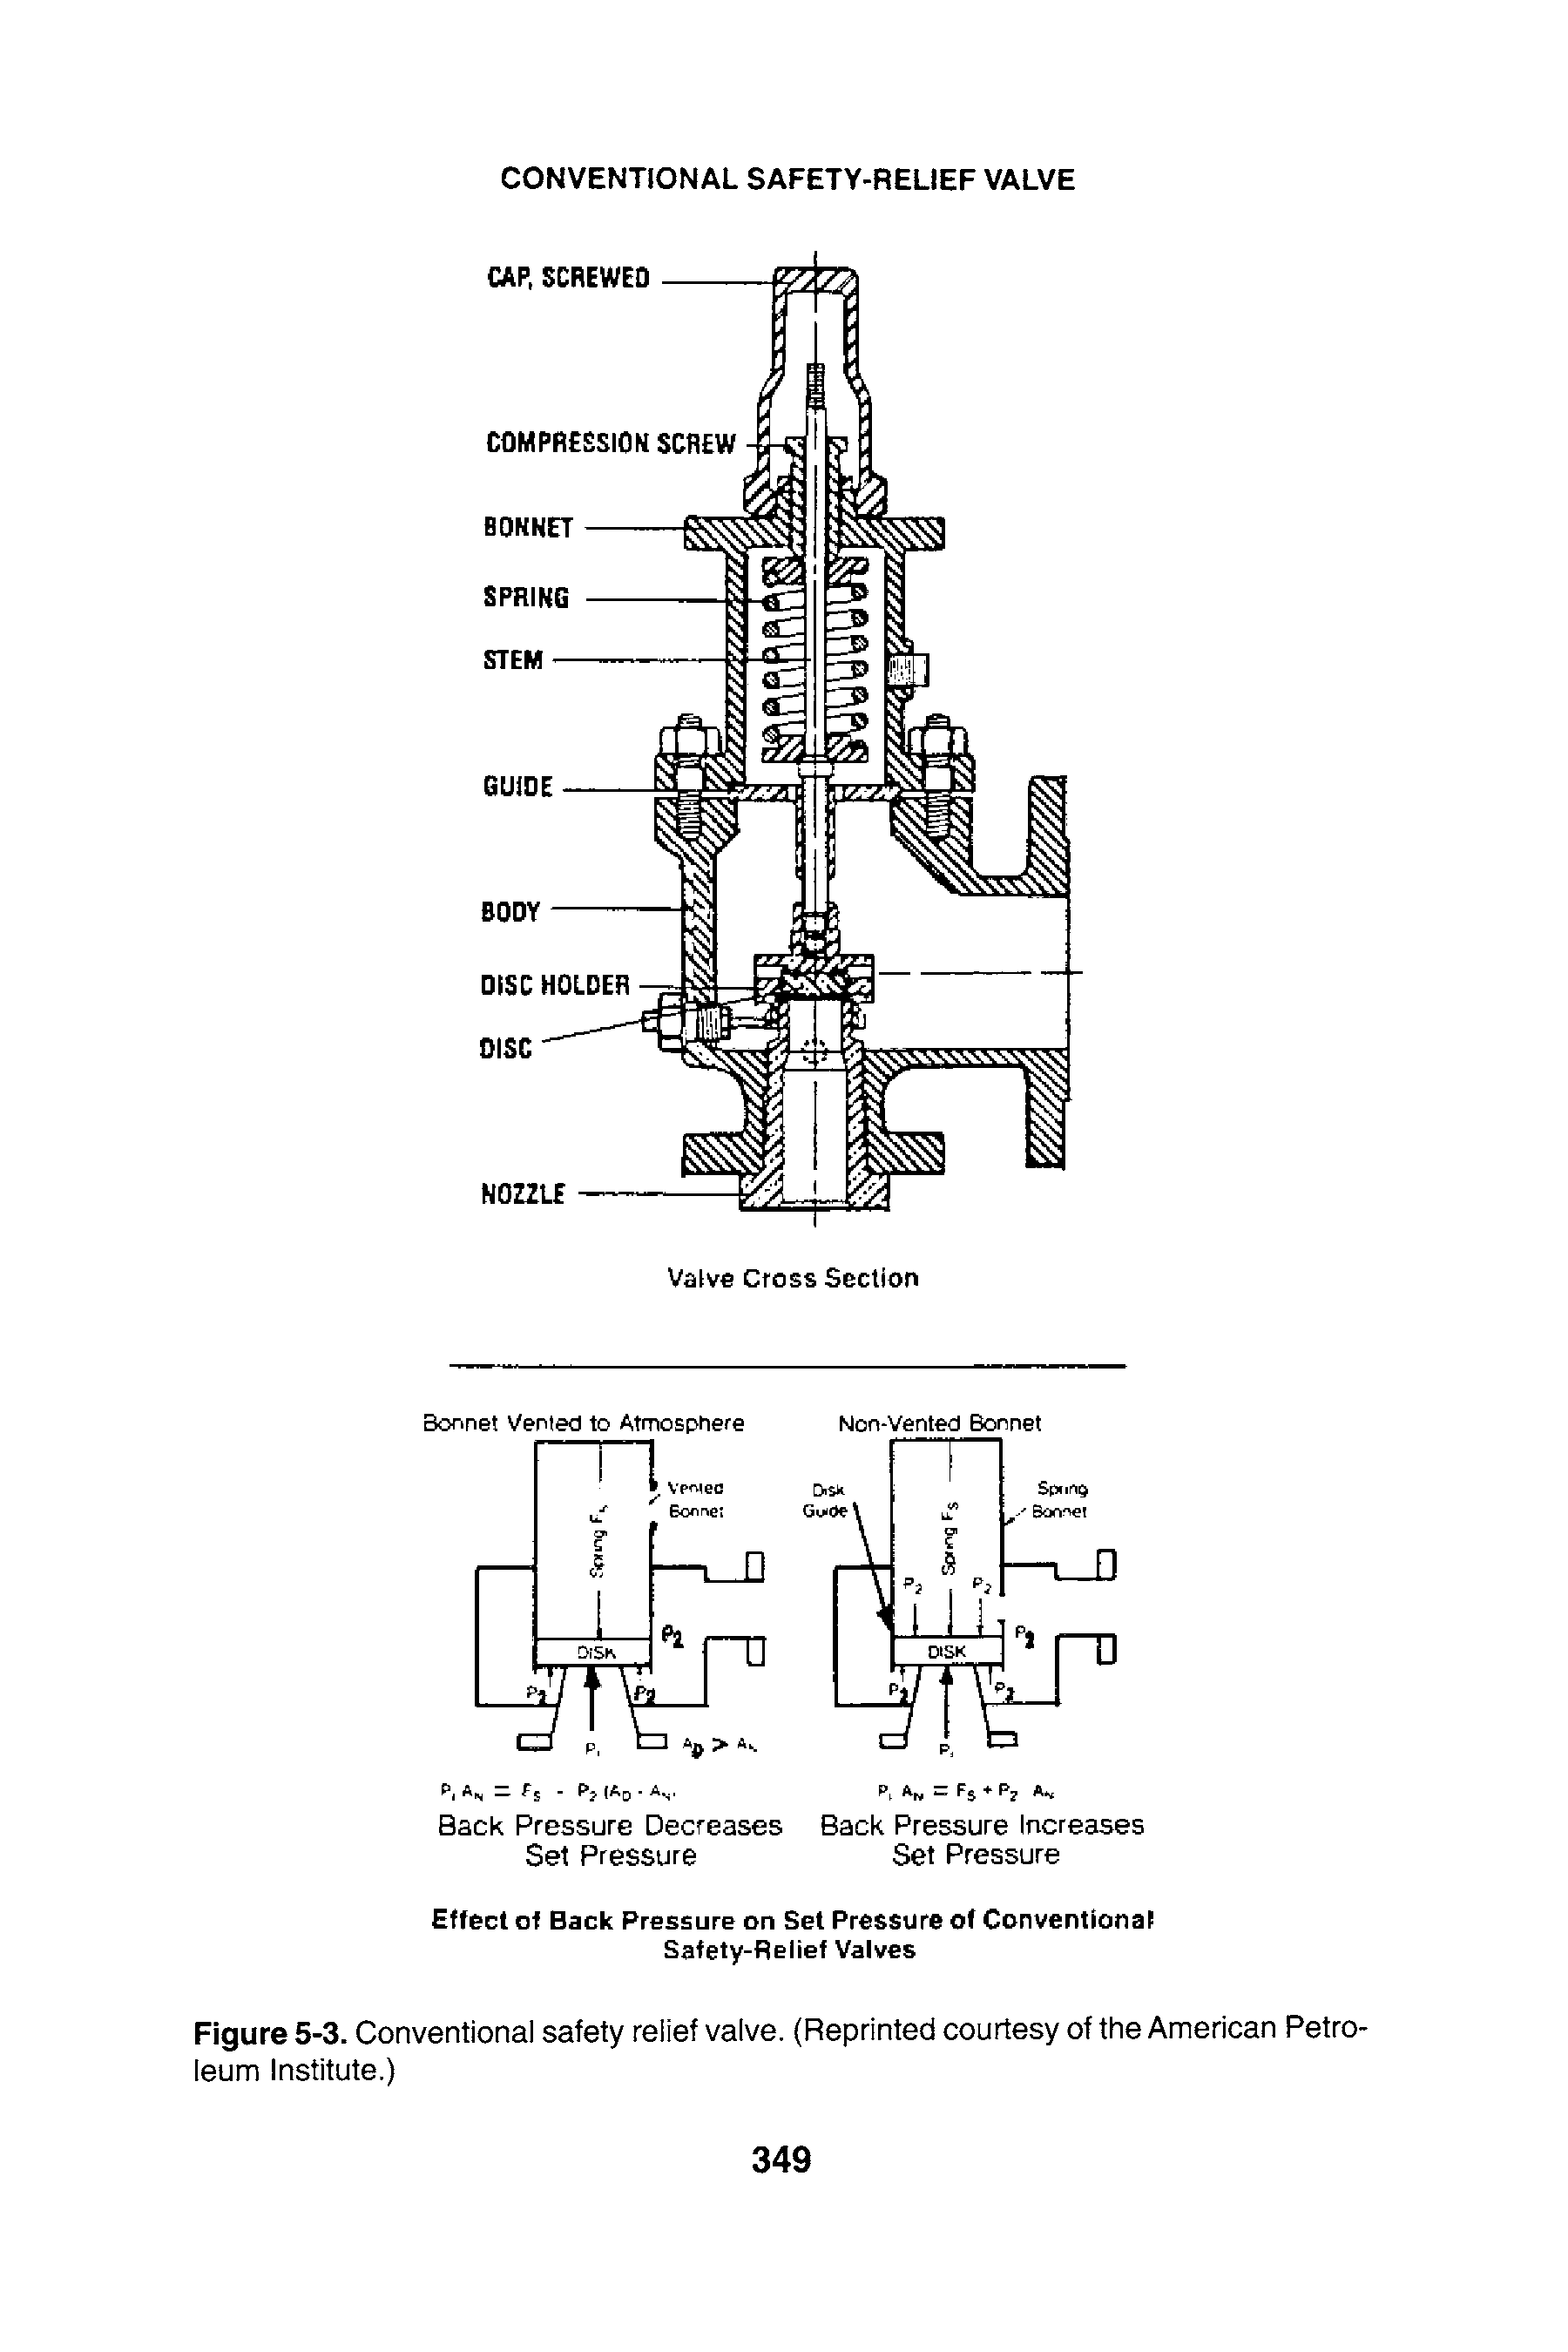 Figure 5-3. Conventional safety relief valve. (Reprinted courtesy of the American Petroleum Institute.)...